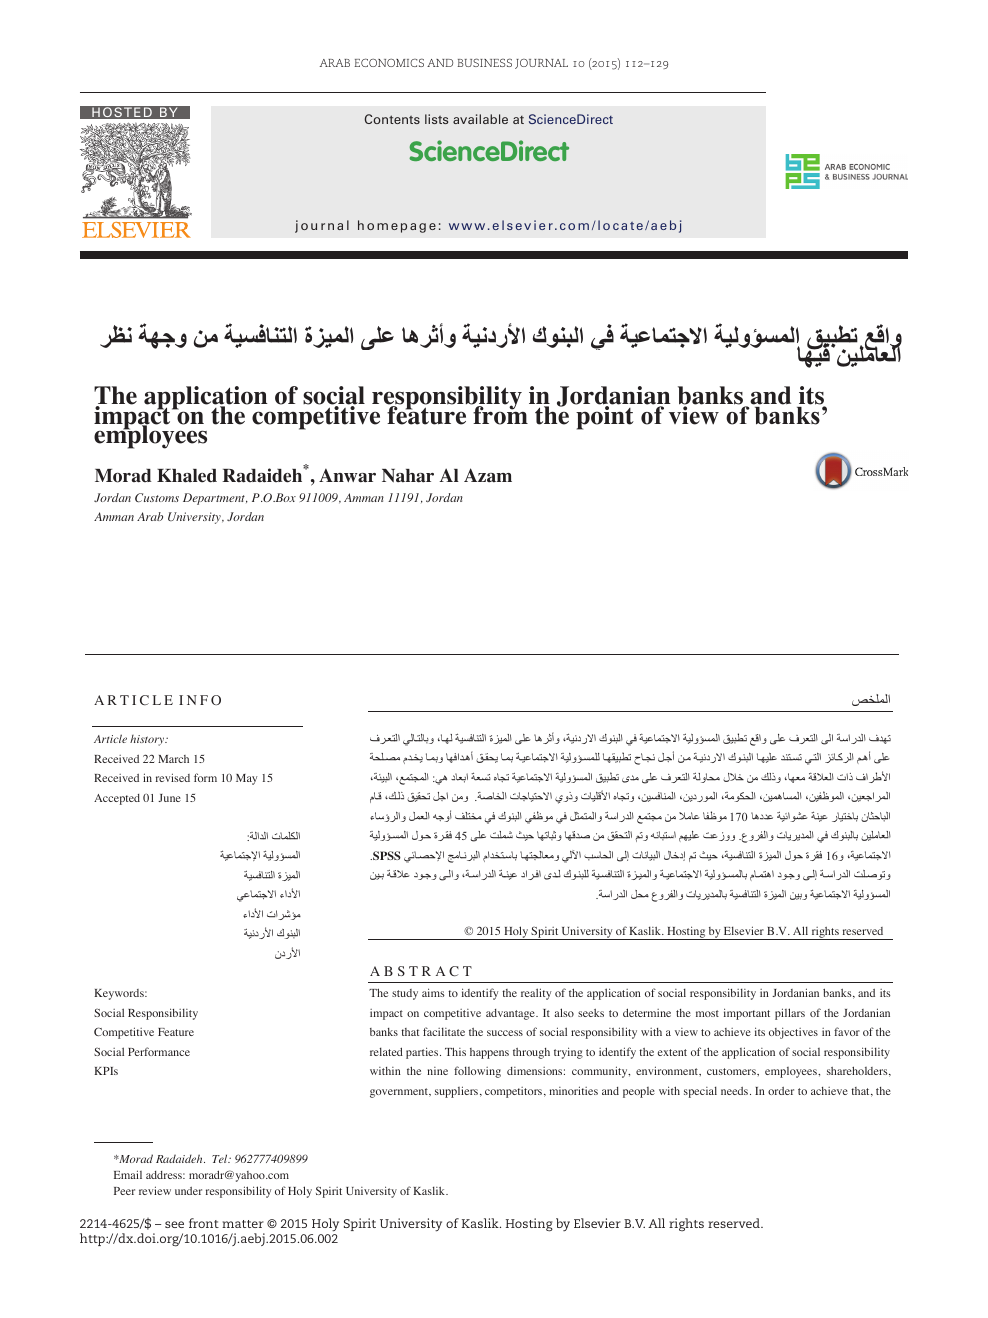 The Application Of Social Responsibility In Jordanian Banks And Its Impact On The Competitive Feature From The Point Of View Of Banks Employees Topic Of Research Paper In Economics And Business